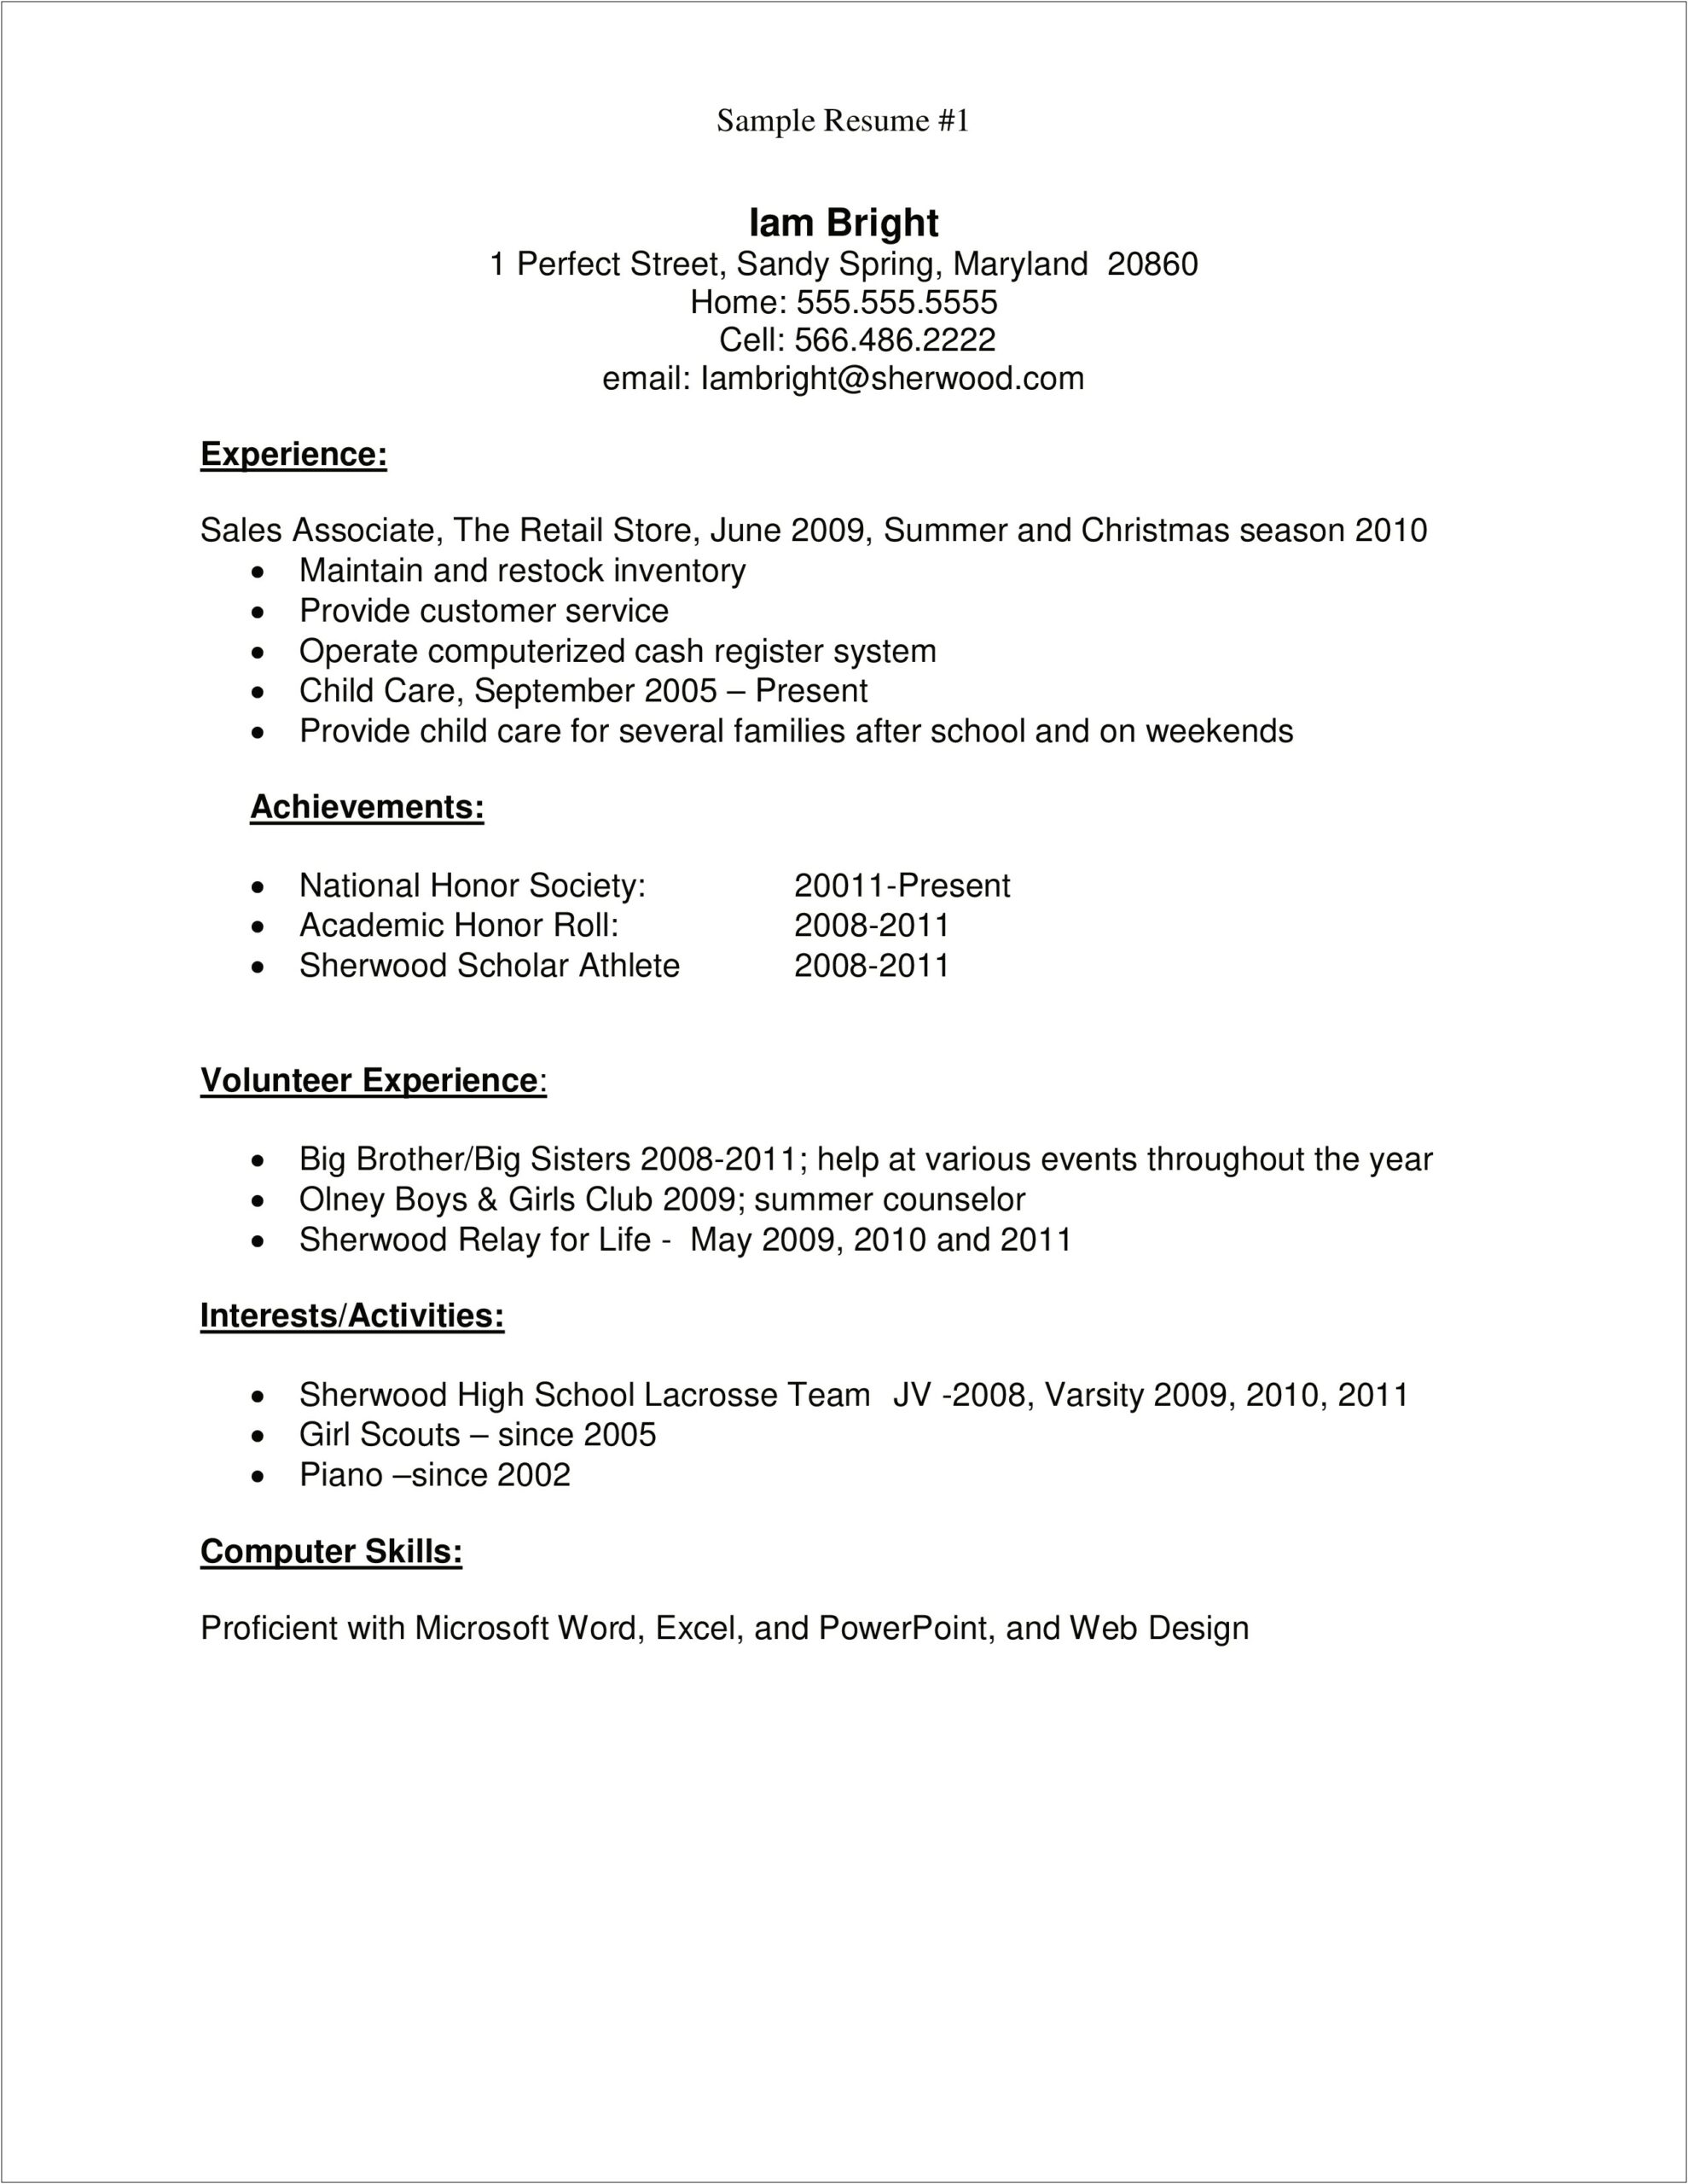 Resume Template After First Job With Work Experience